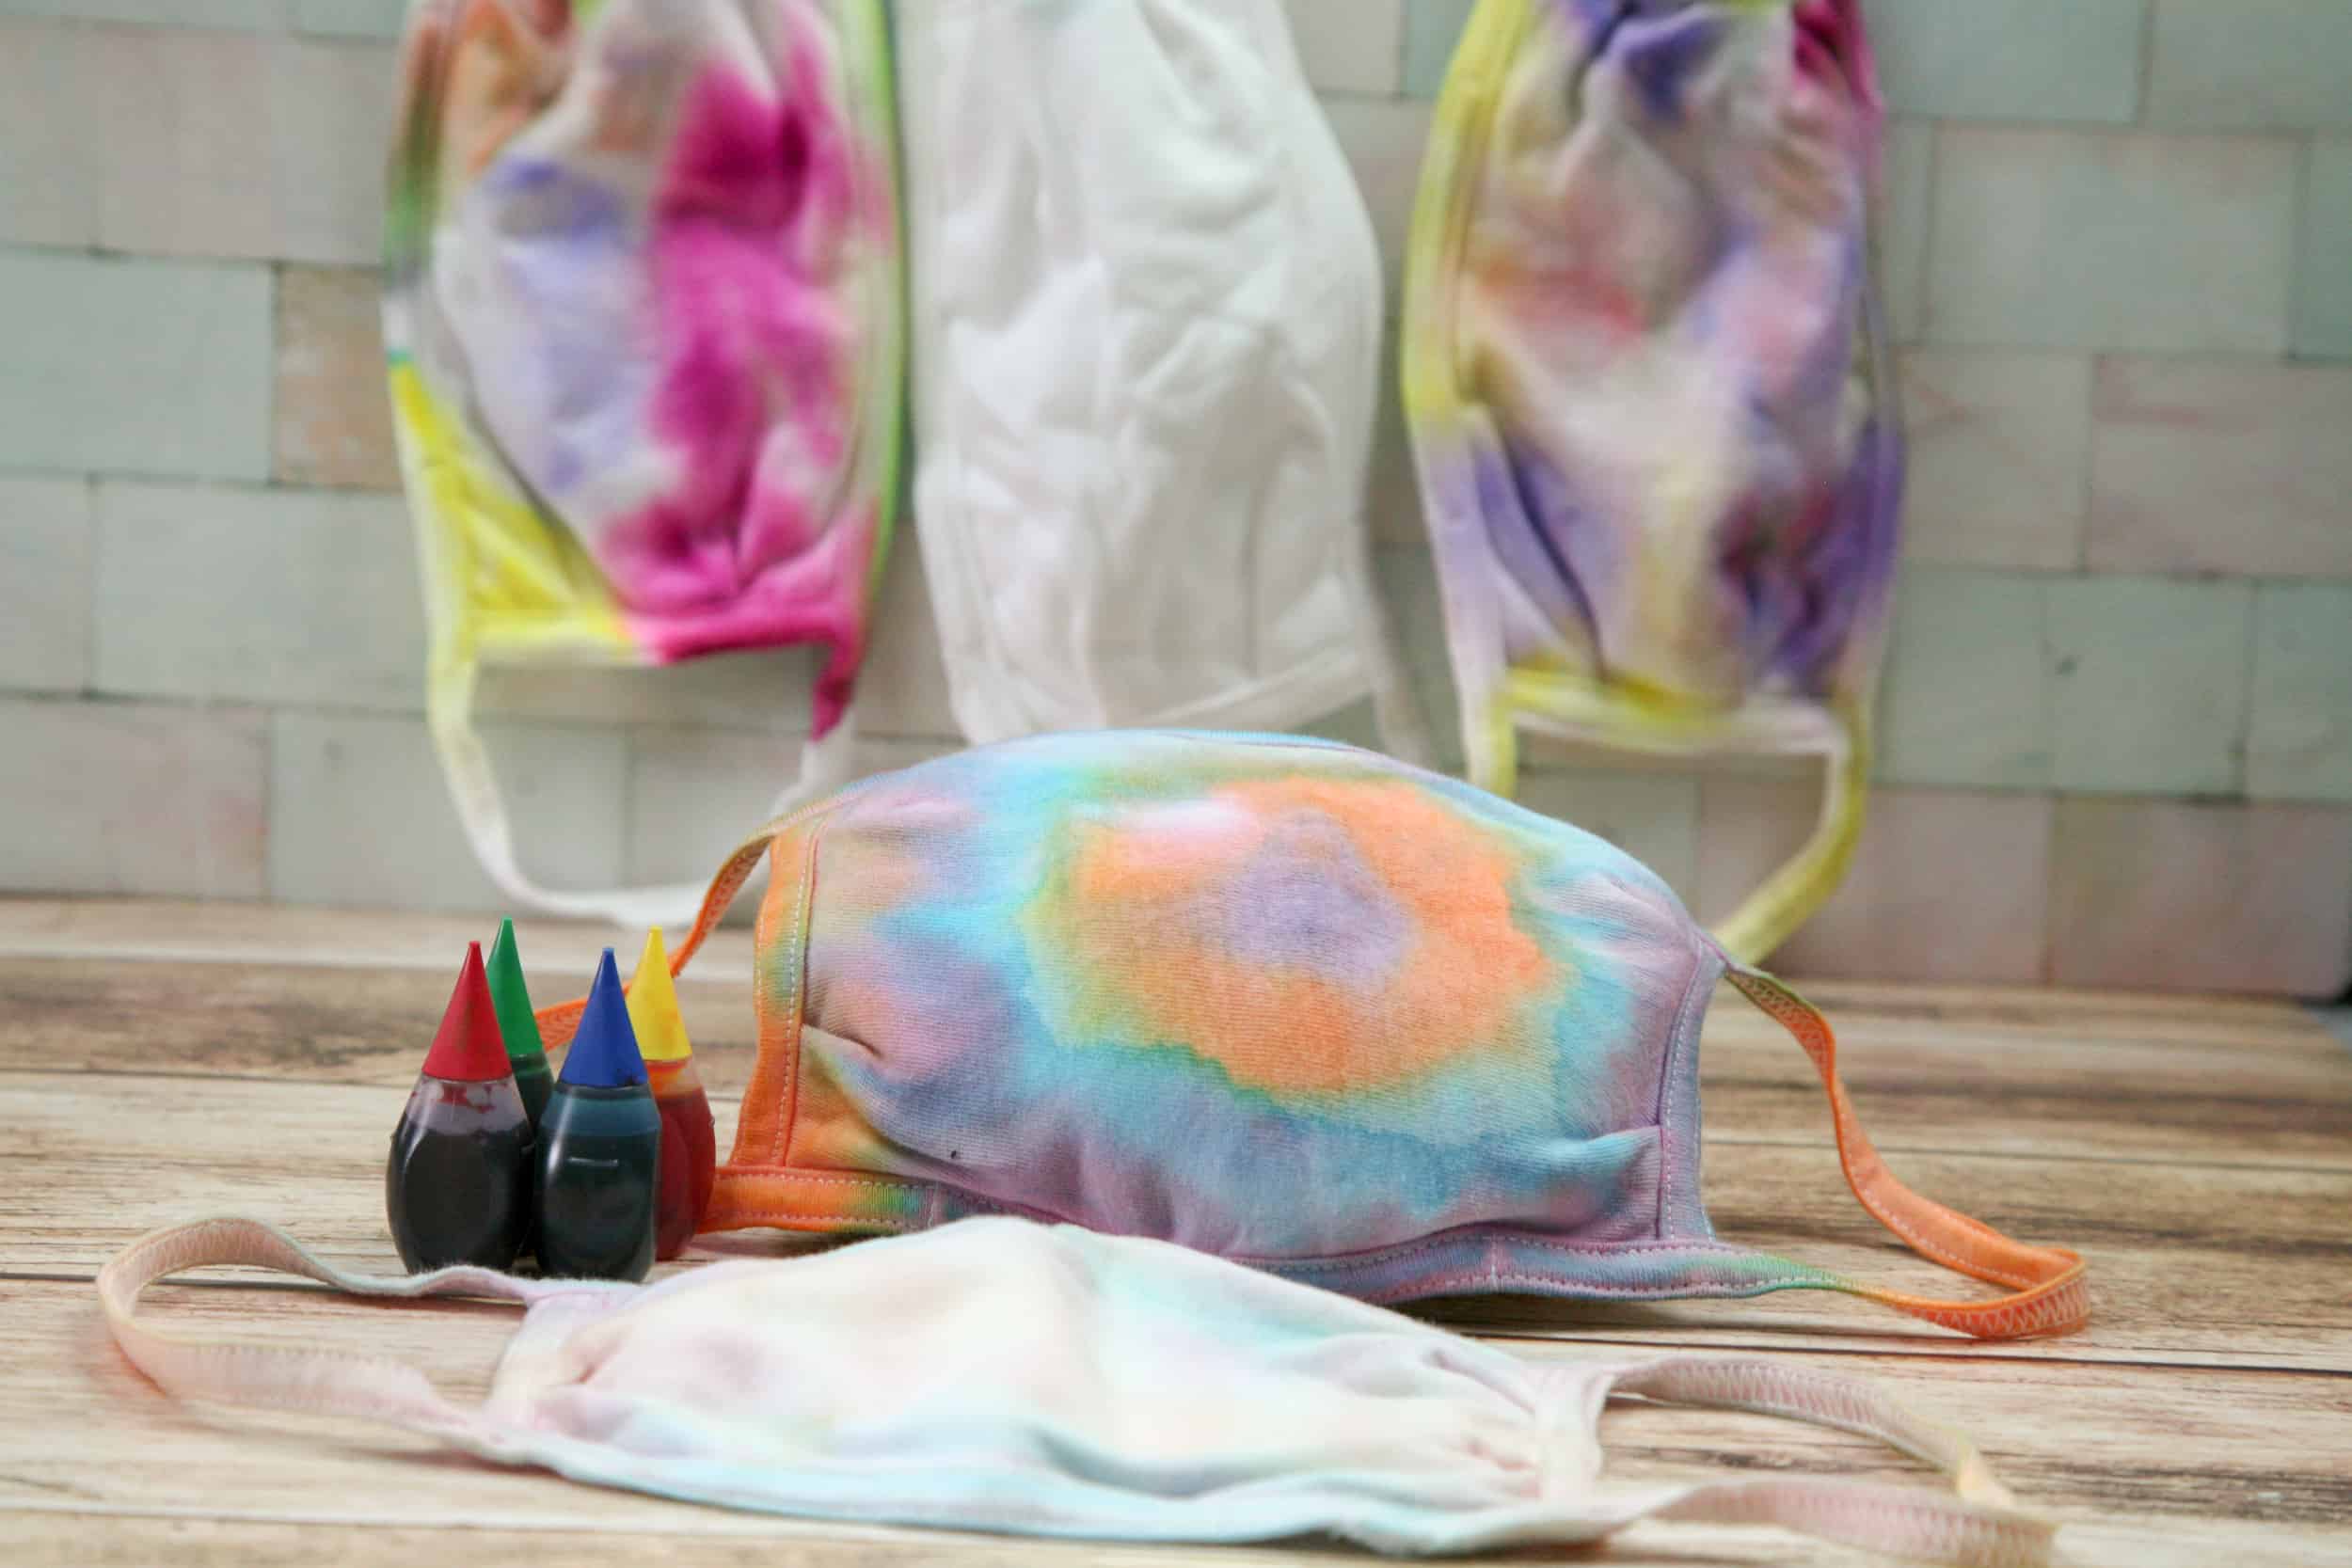 How to make tie dye masks with food coloring